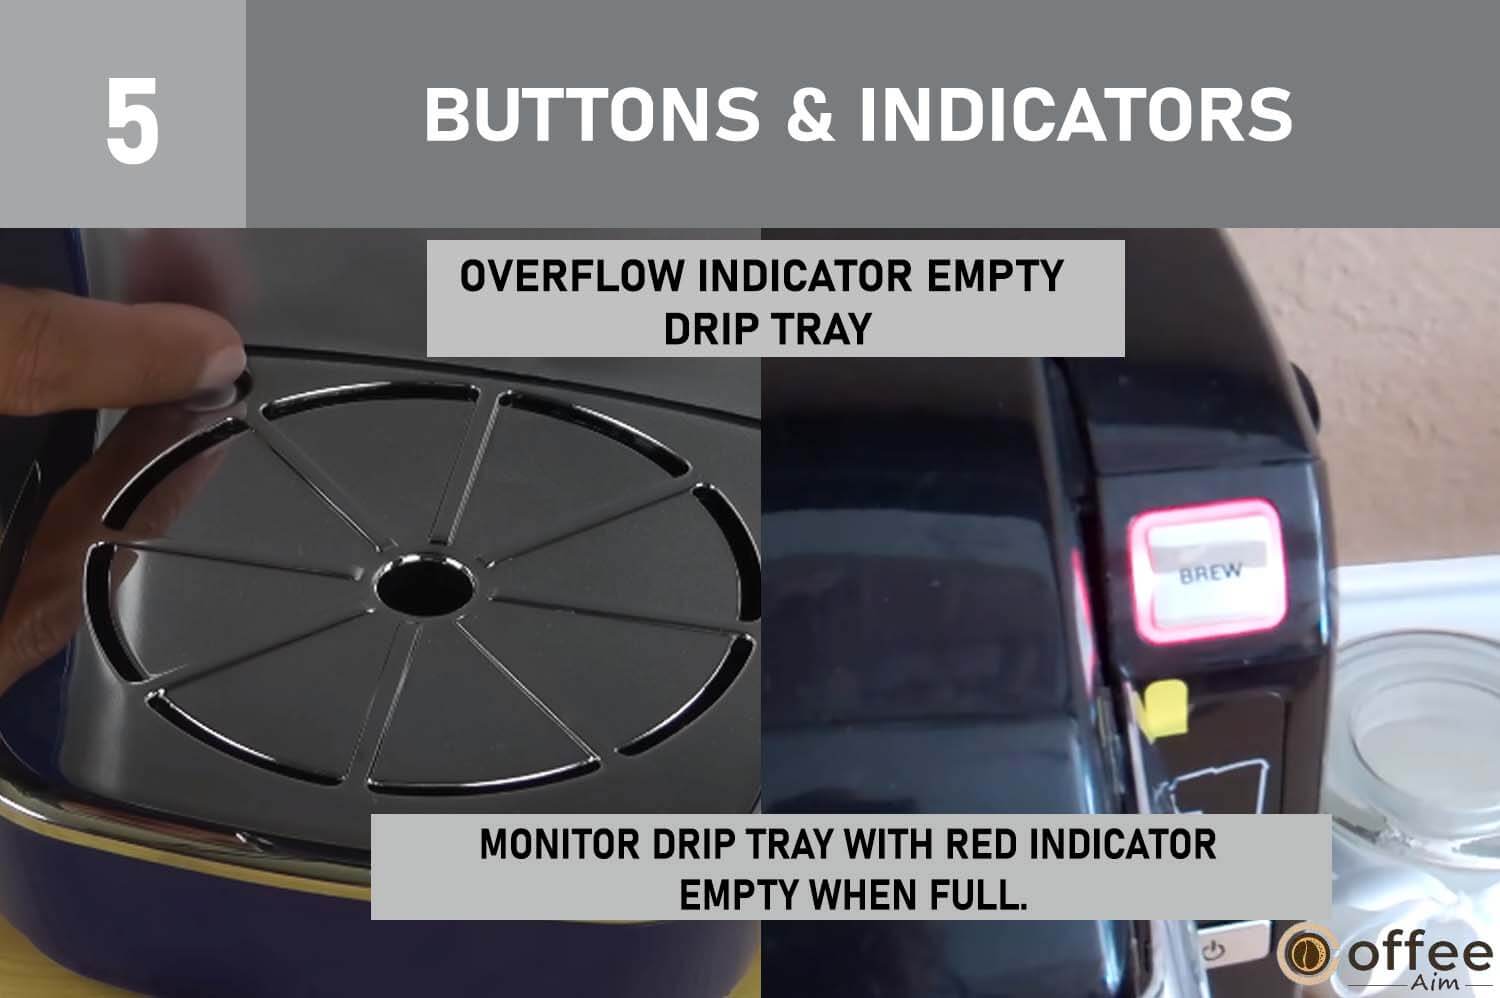 The included image illustrates the "Drip Tray Overflow Indicator and Emptying" under the section "Buttons & Indicators" in the comprehensive guide on using the Keurig B-31.